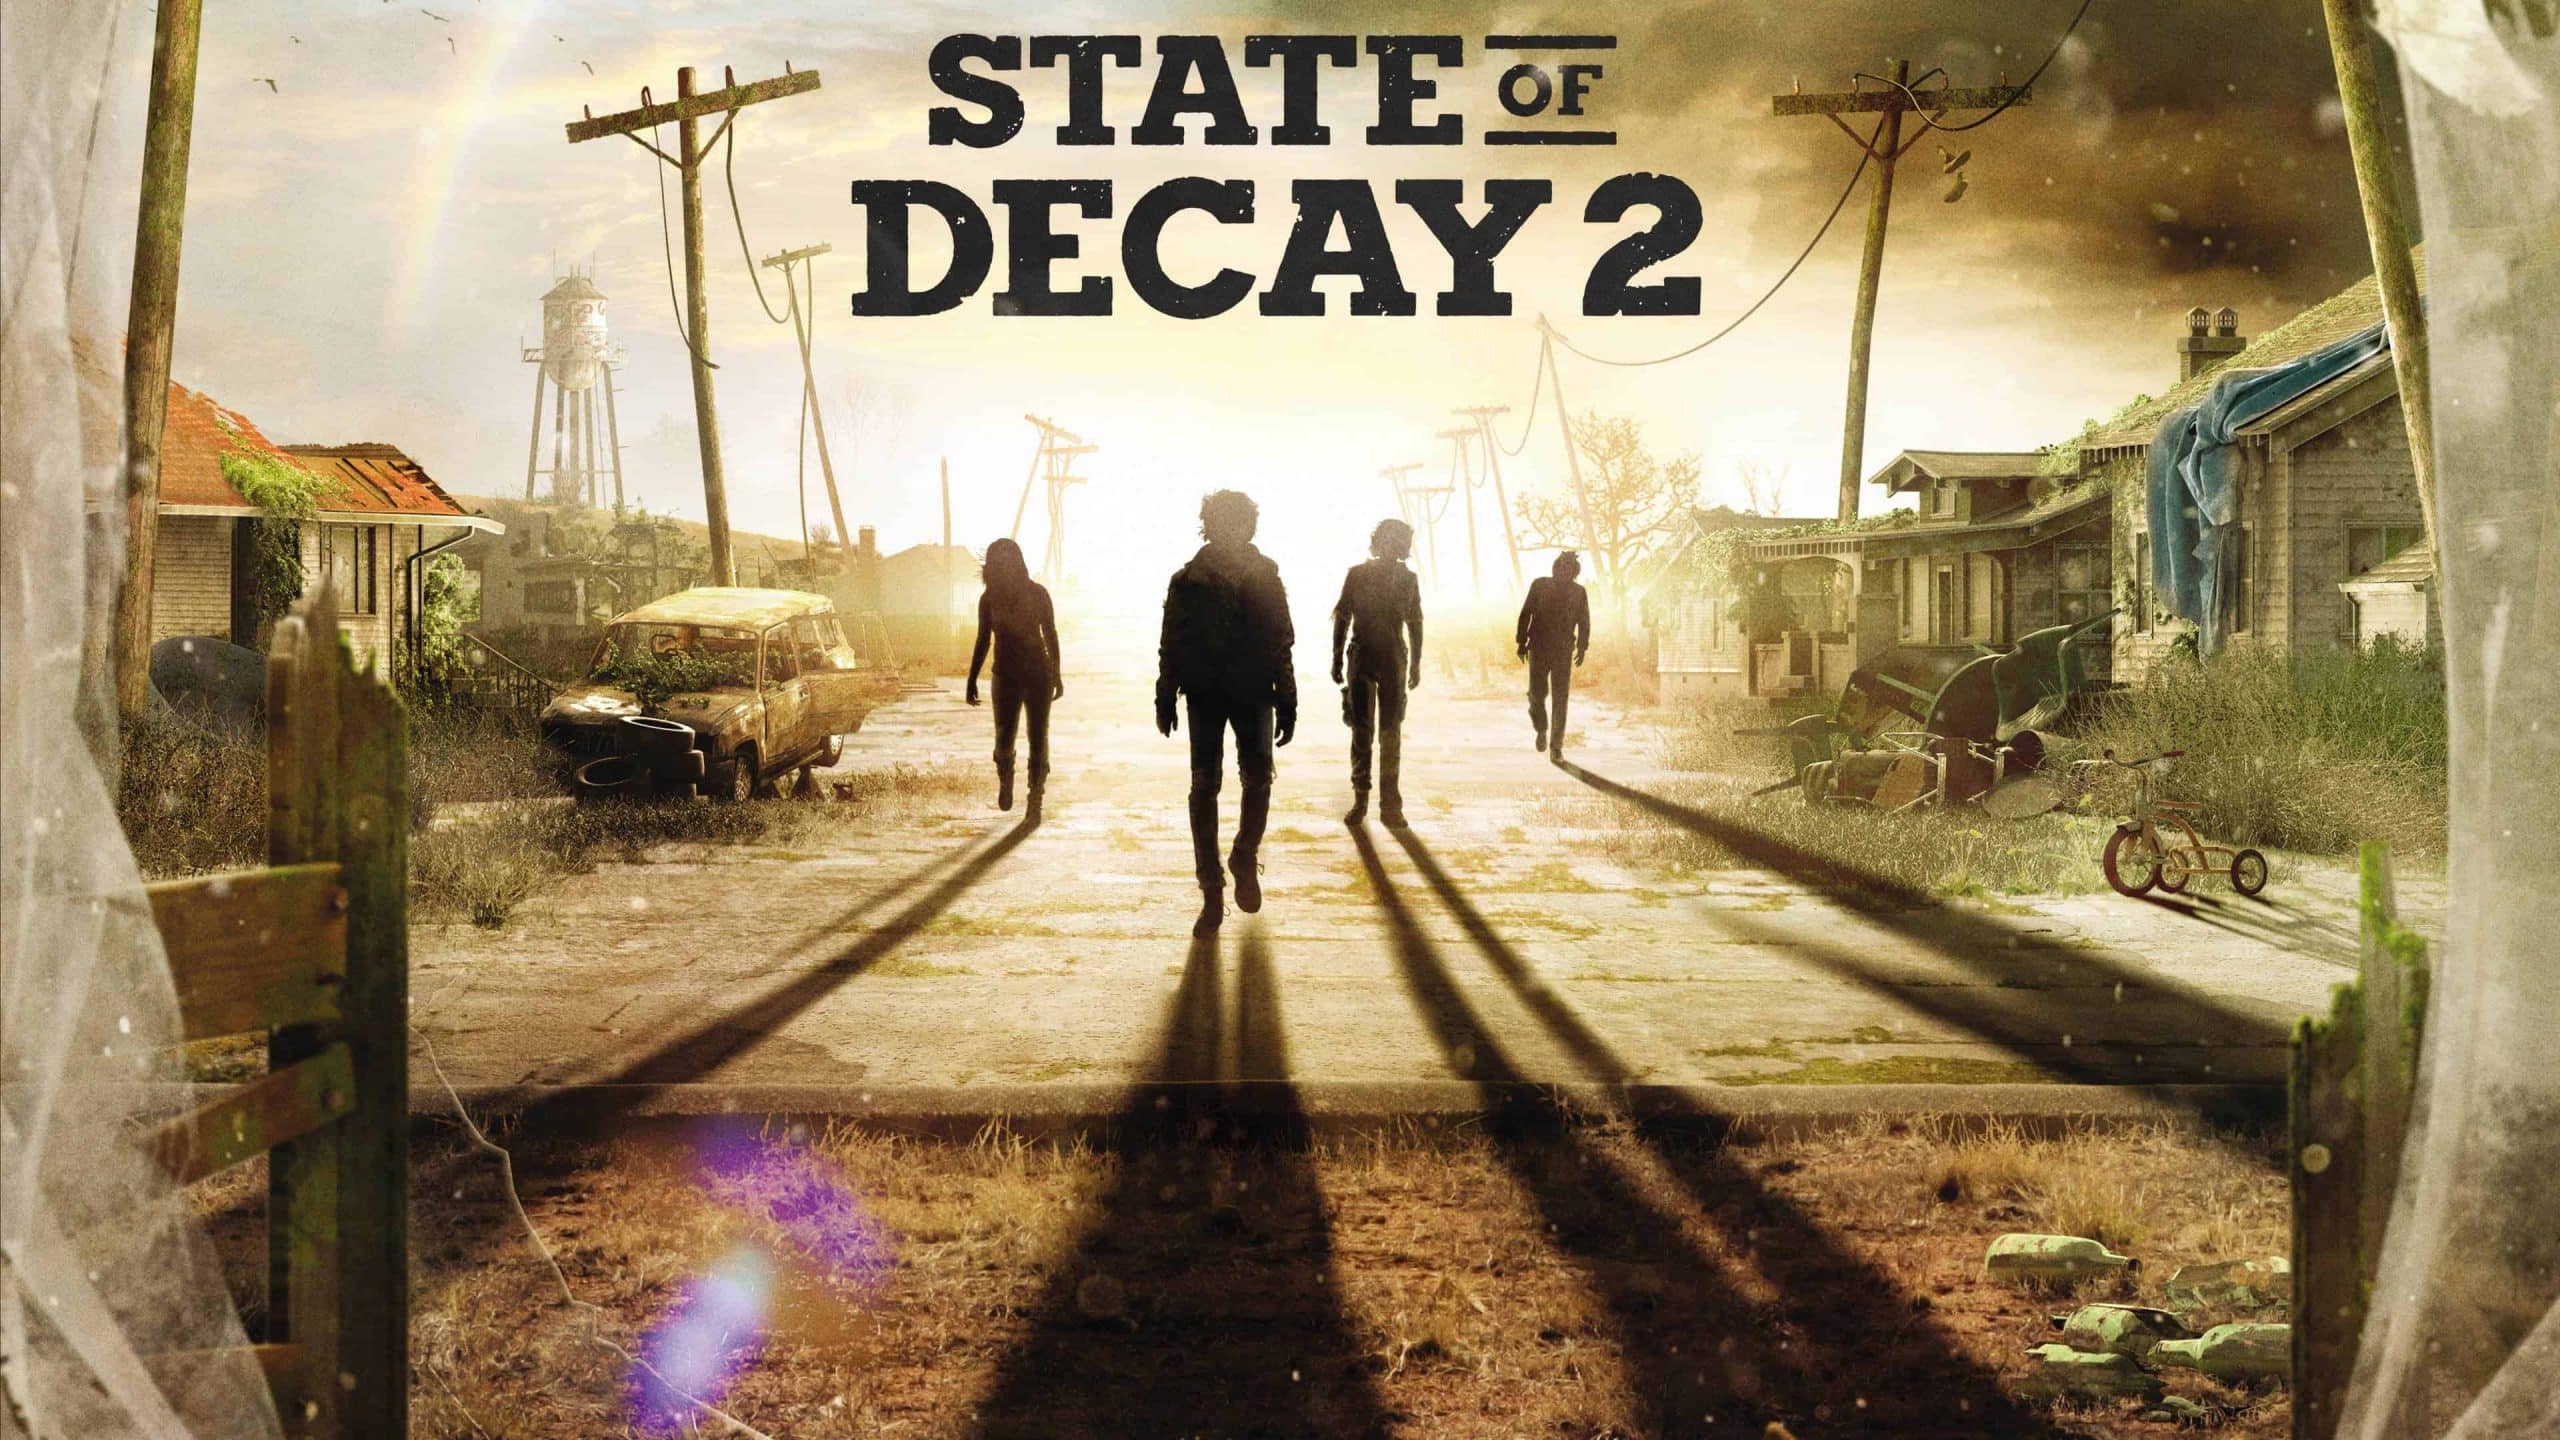 Will state of decay 2 be on PS4?